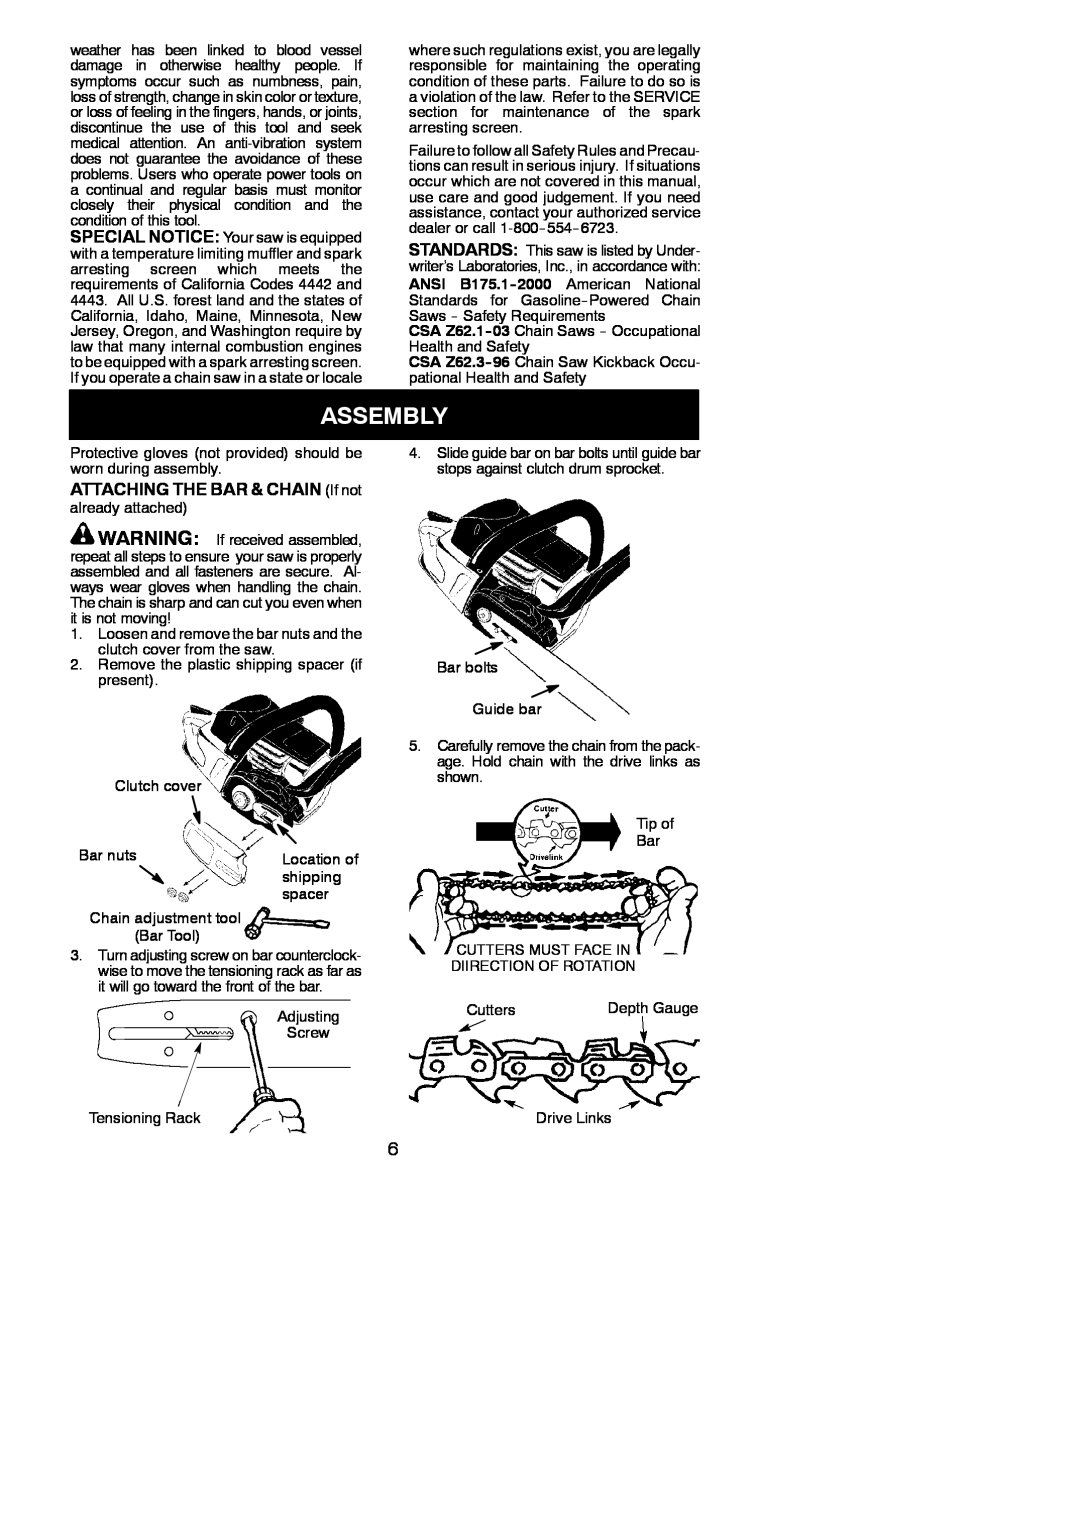 Poulan 530165555-01 instruction manual Assembly, ATTACHING THE BAR & CHAIN If not 